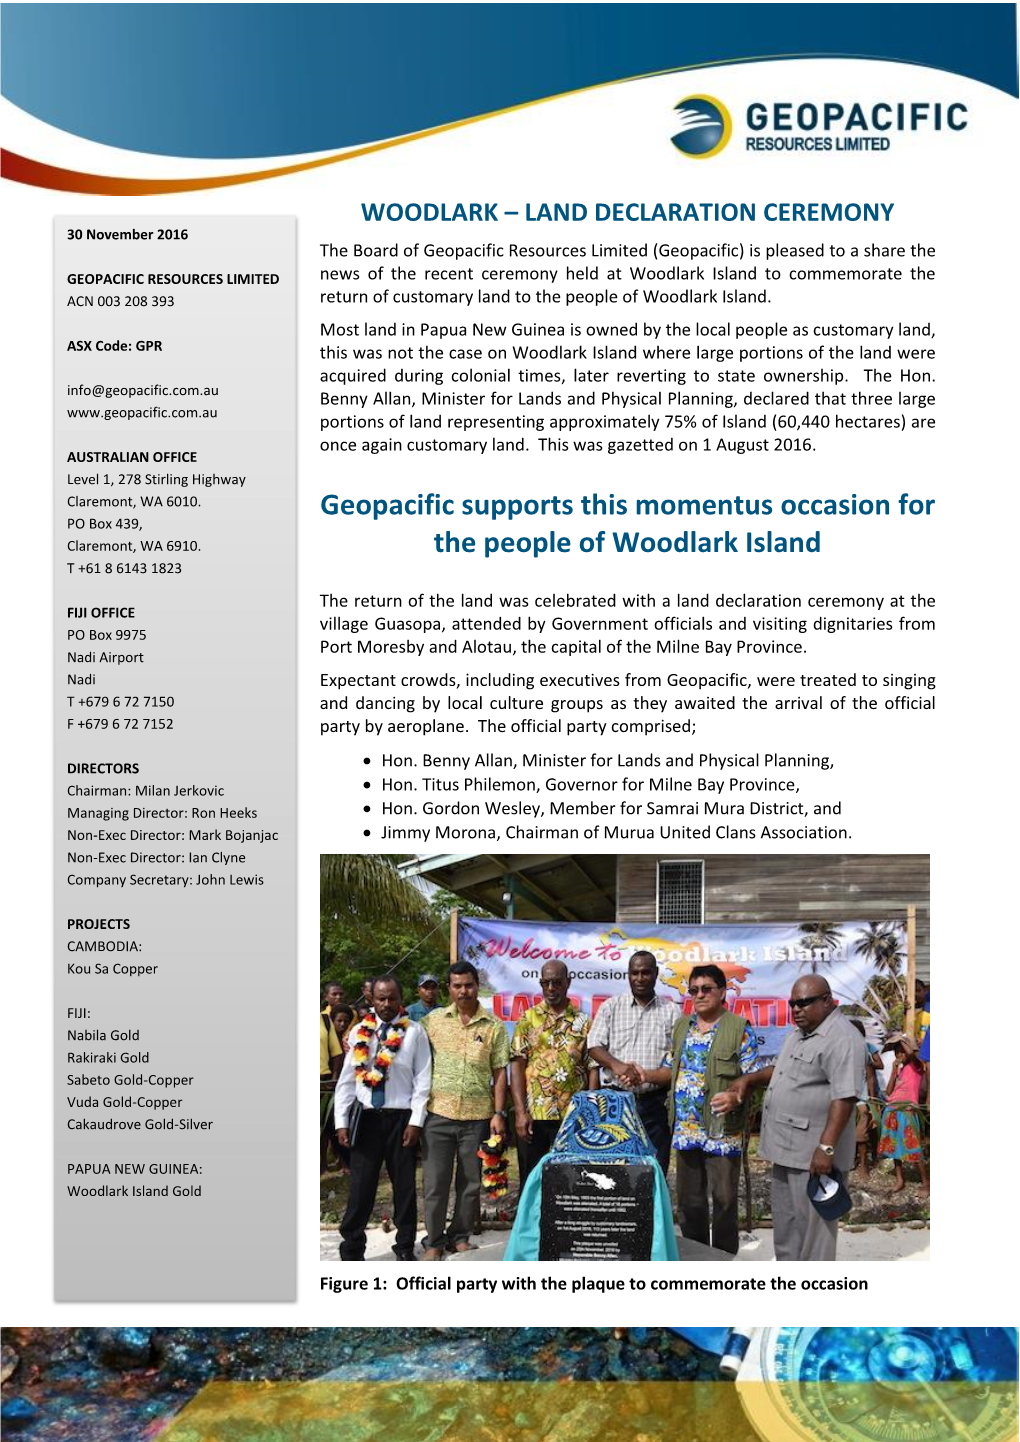 Geopacific Supports This Momentus Occasion for the People of Woodlark